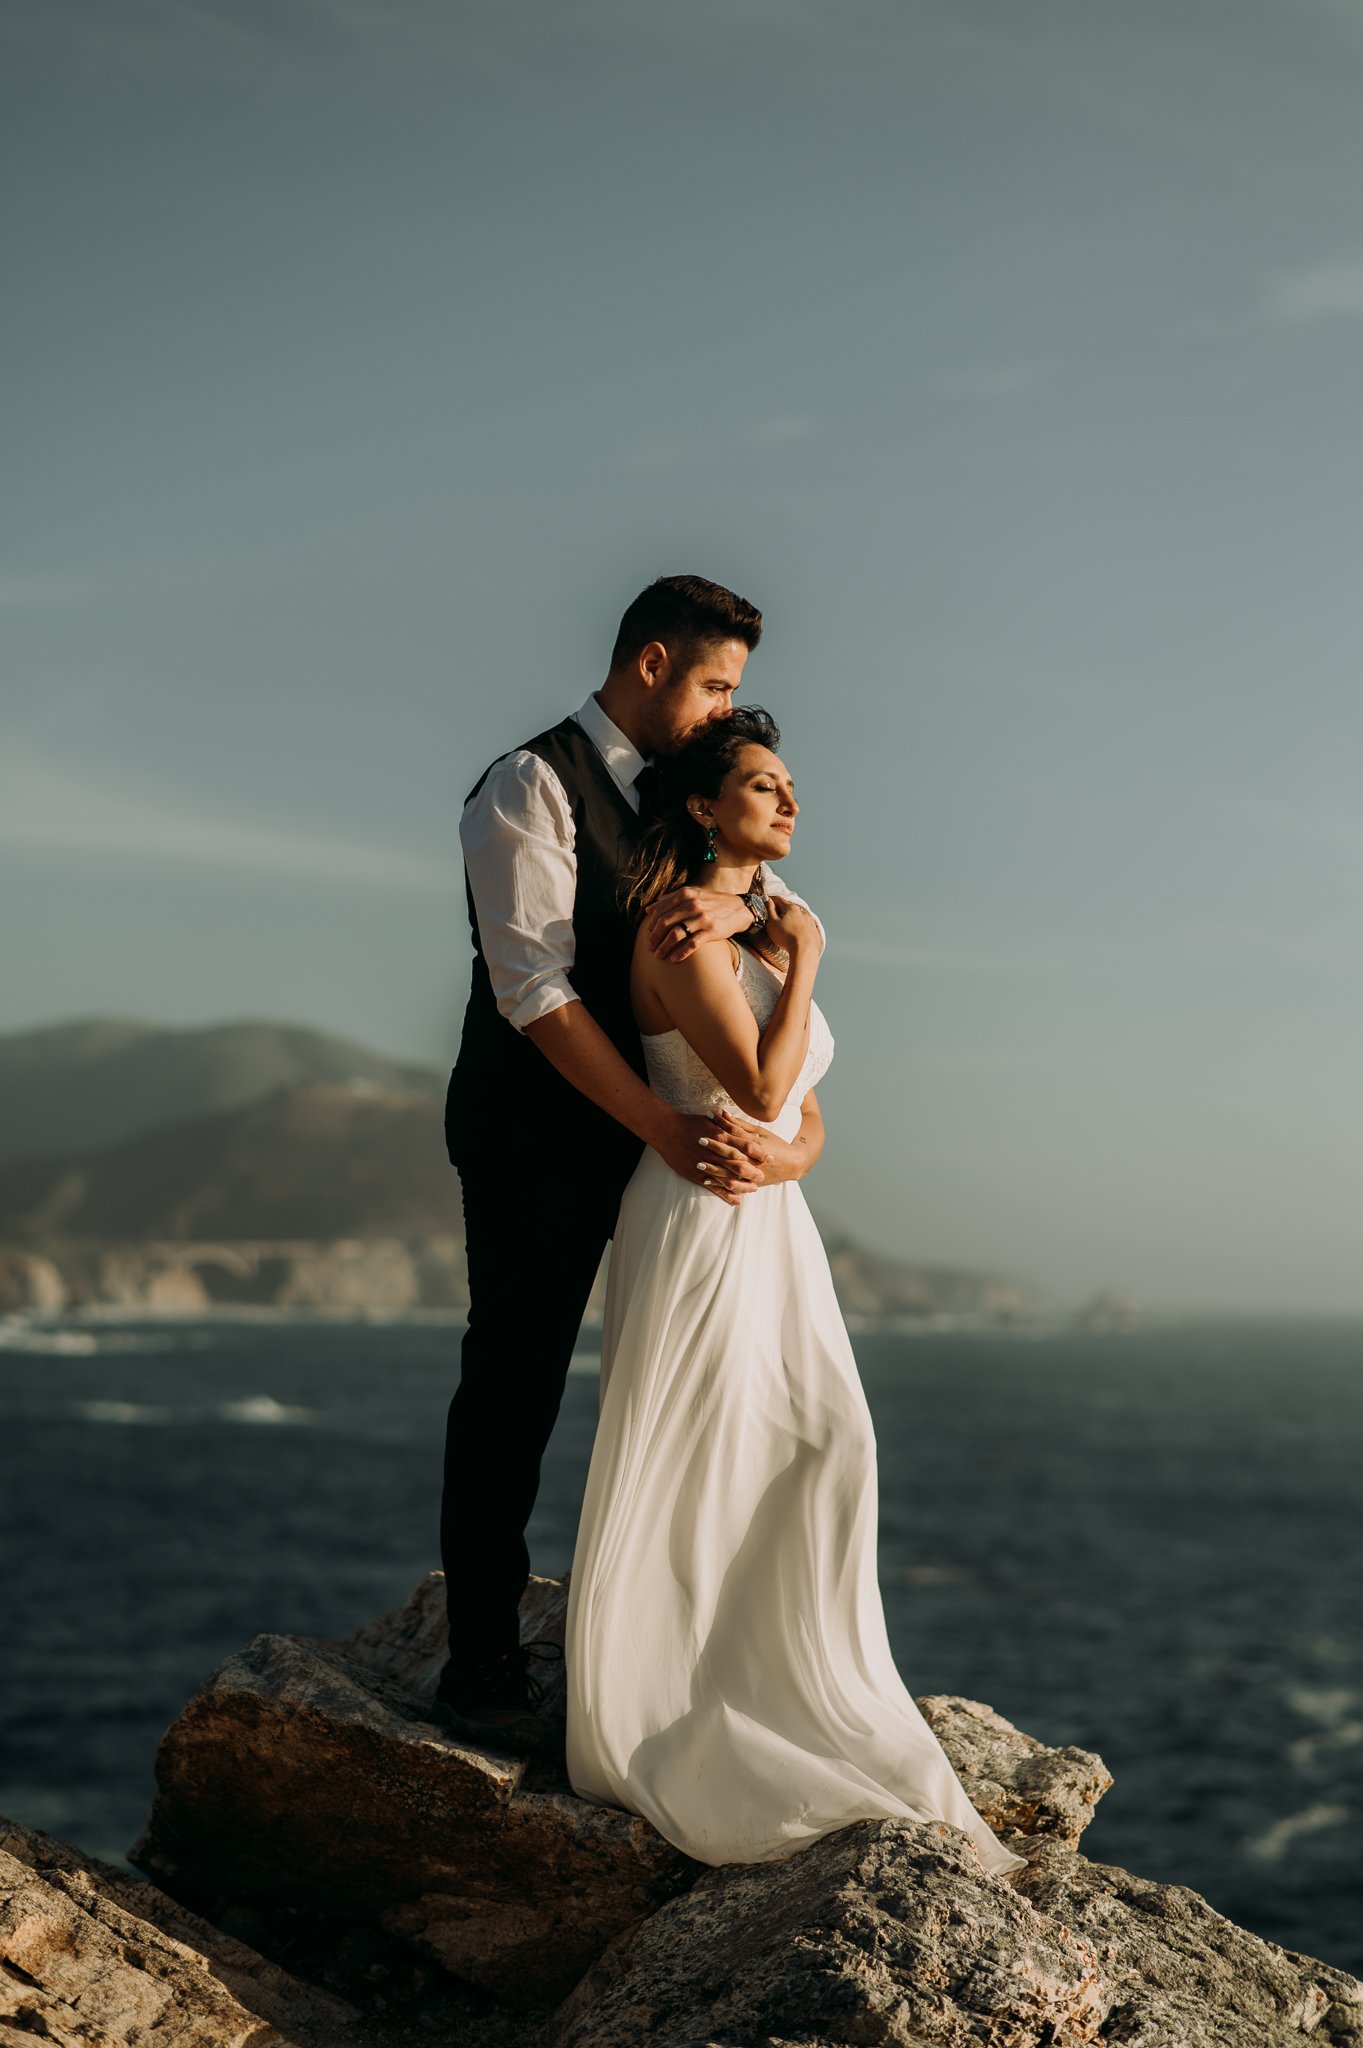 Newly married couple in Big Sur California